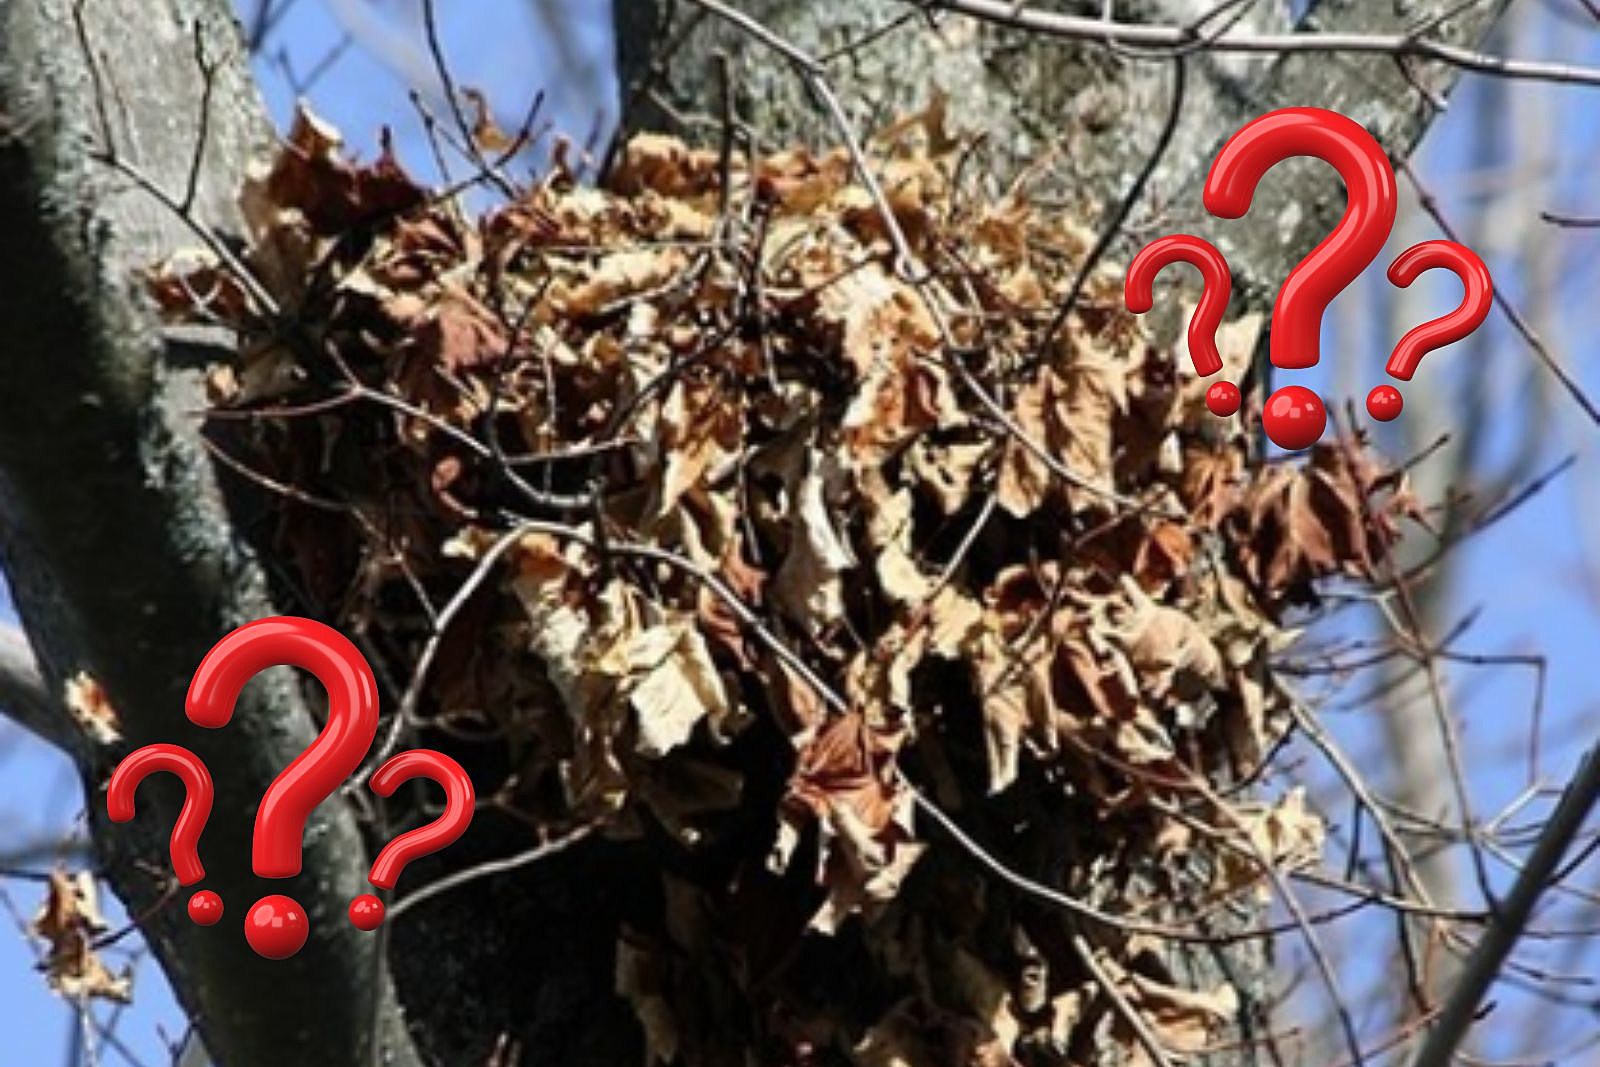 Those Bunches of Leaves in New Jersey, New York and Pennsylvania Trees
May Not Be Bird’s Nests